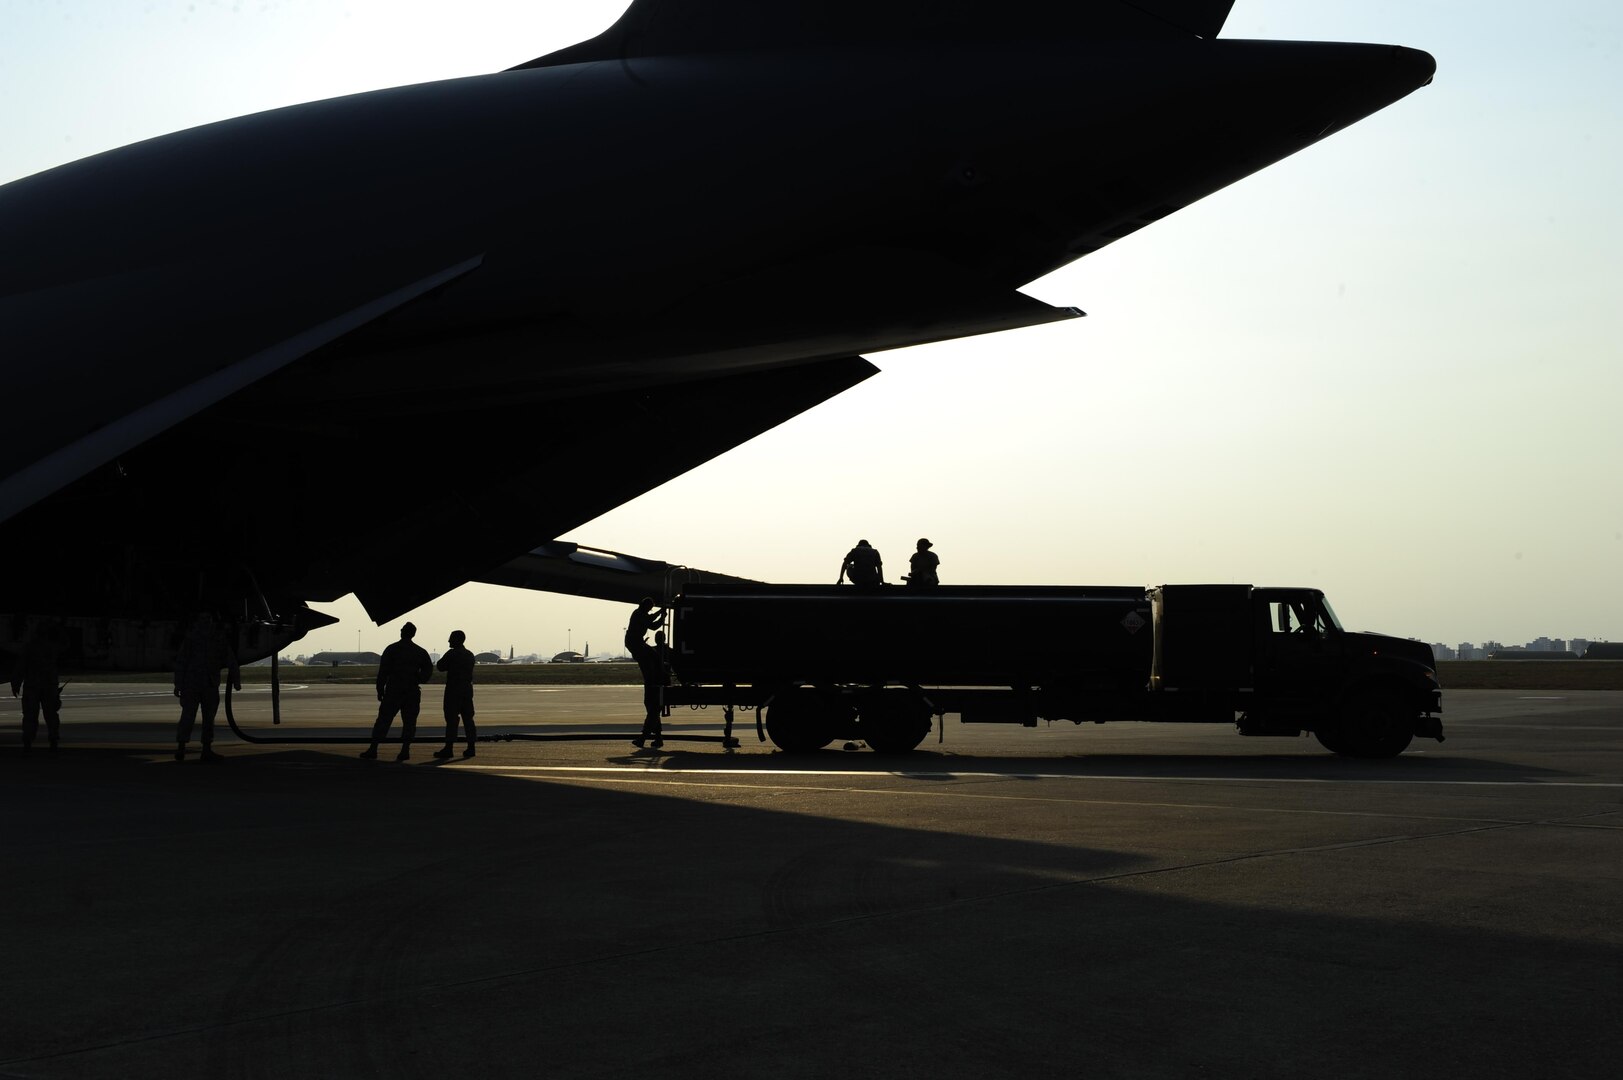 Airmen assigned to the 39th Logistics Readiness Squadron, unload fuel from a U.S. Air Force C-5M Super Galaxy July 22, 2016, at Incirlik Air Base, Turkey. Due to an extended loss of commercial power to the base, supplies, including food, water and fuel were delivered to sustain missions here at Incirlik. (U.S. Air Force photo by Airman 1st Class Devin M. Rumbaugh)